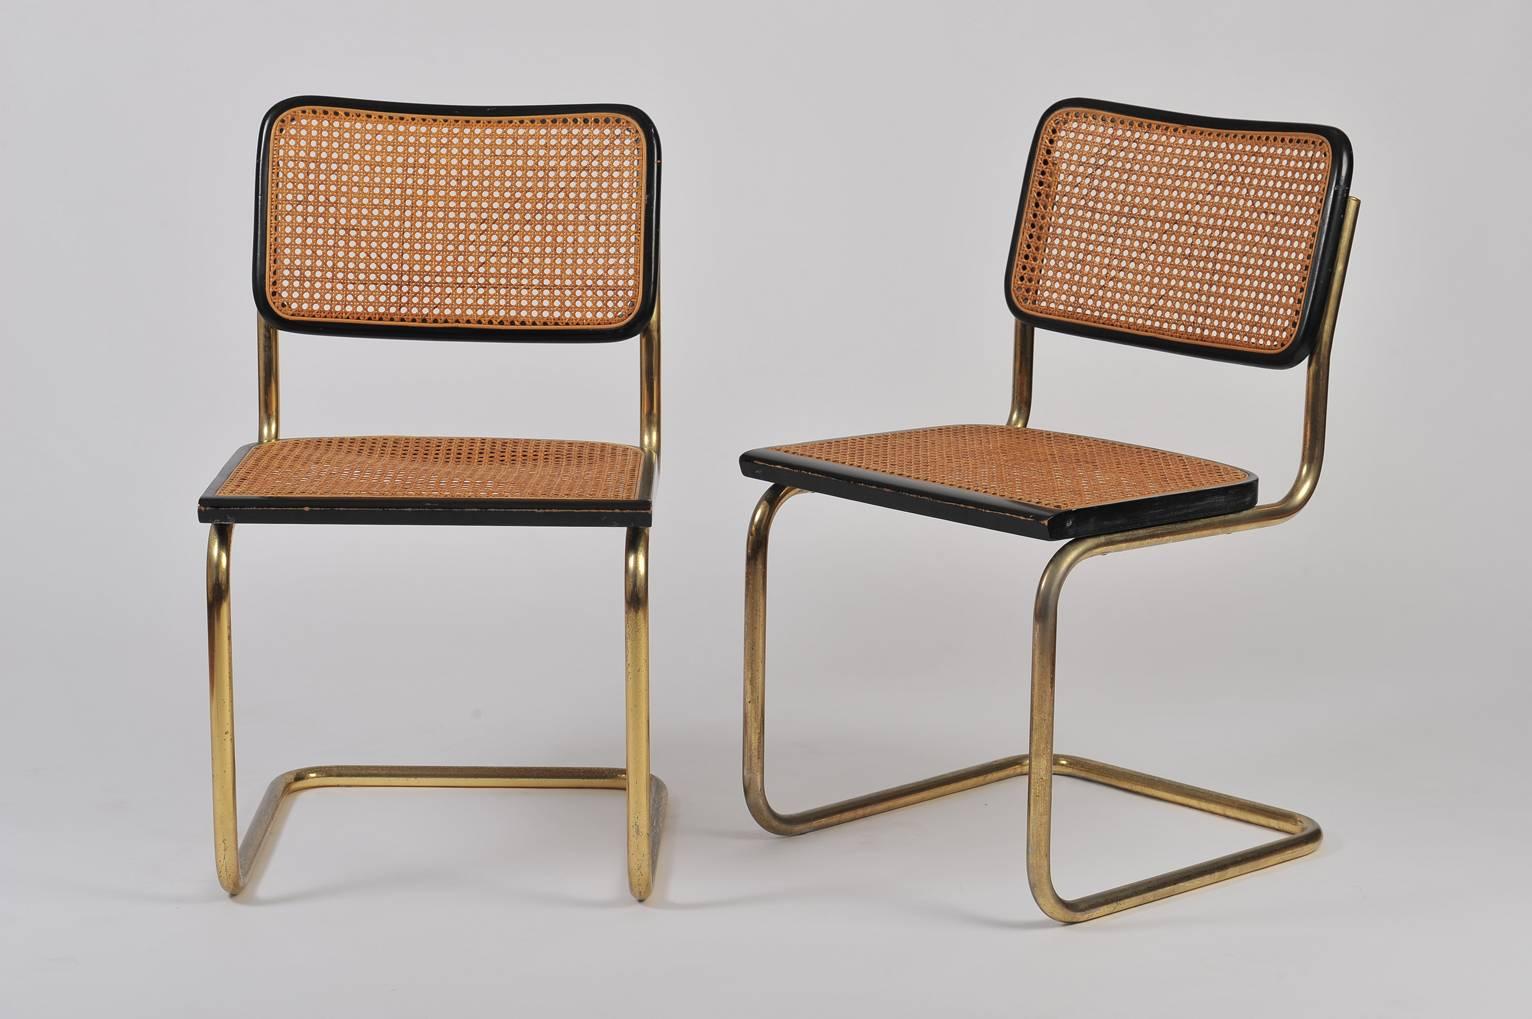 A pair of cane, gold lacquered metal and ebonised beech cantilever chairs
Designed by Hungarian-American designer Marcel Breuer in 1928, model Cesca.

Whilst this iconic piece from the Bauhaus movement is very well know in chrome, our gold